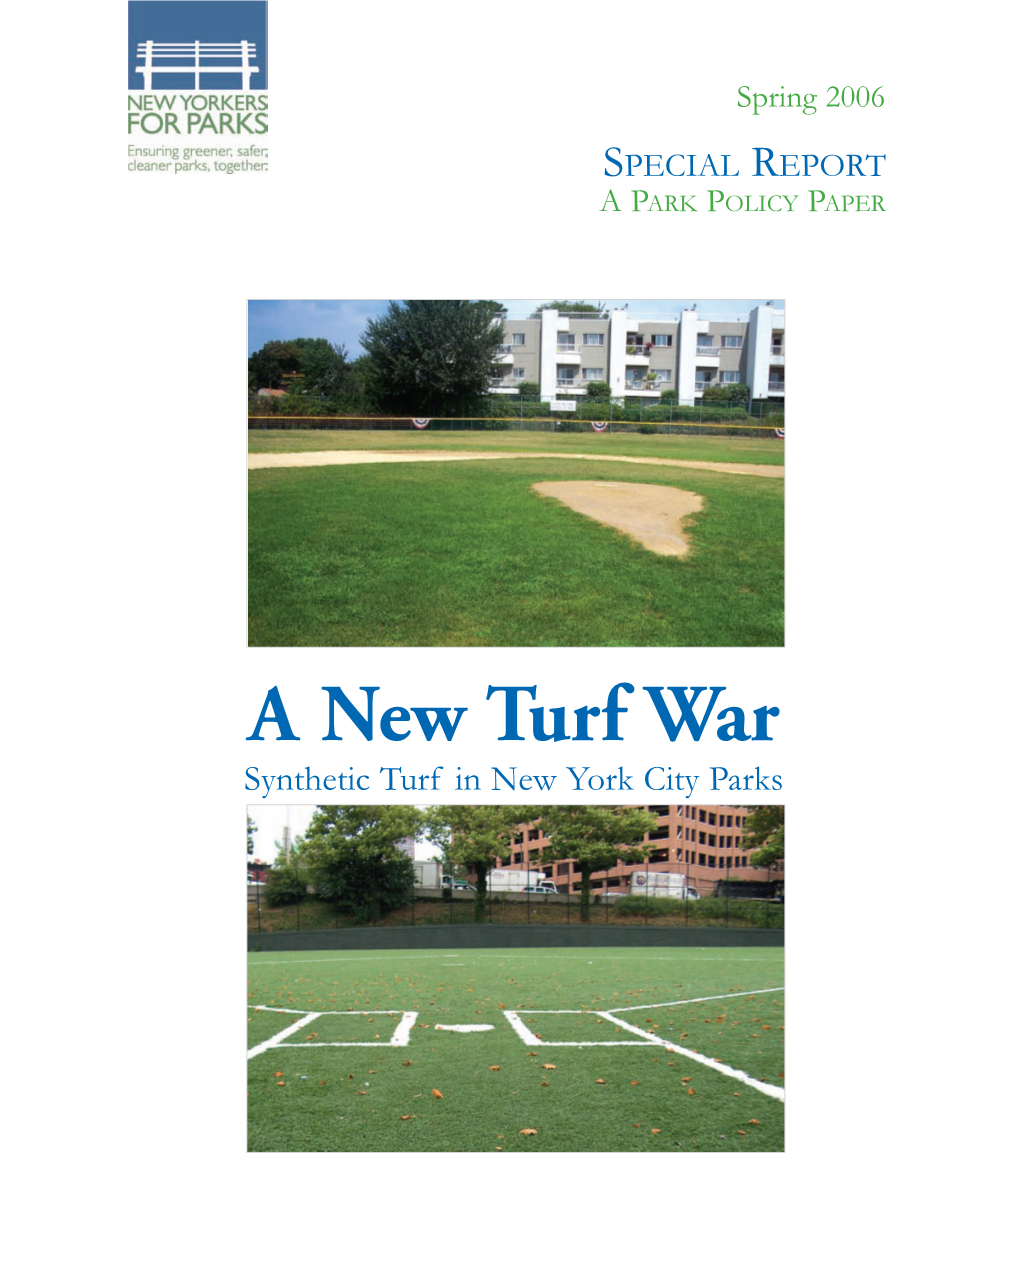 A New Turf War" - Spring 2006 Spring 2006 SPECIAL REPORT a PARK POLICY PAPER